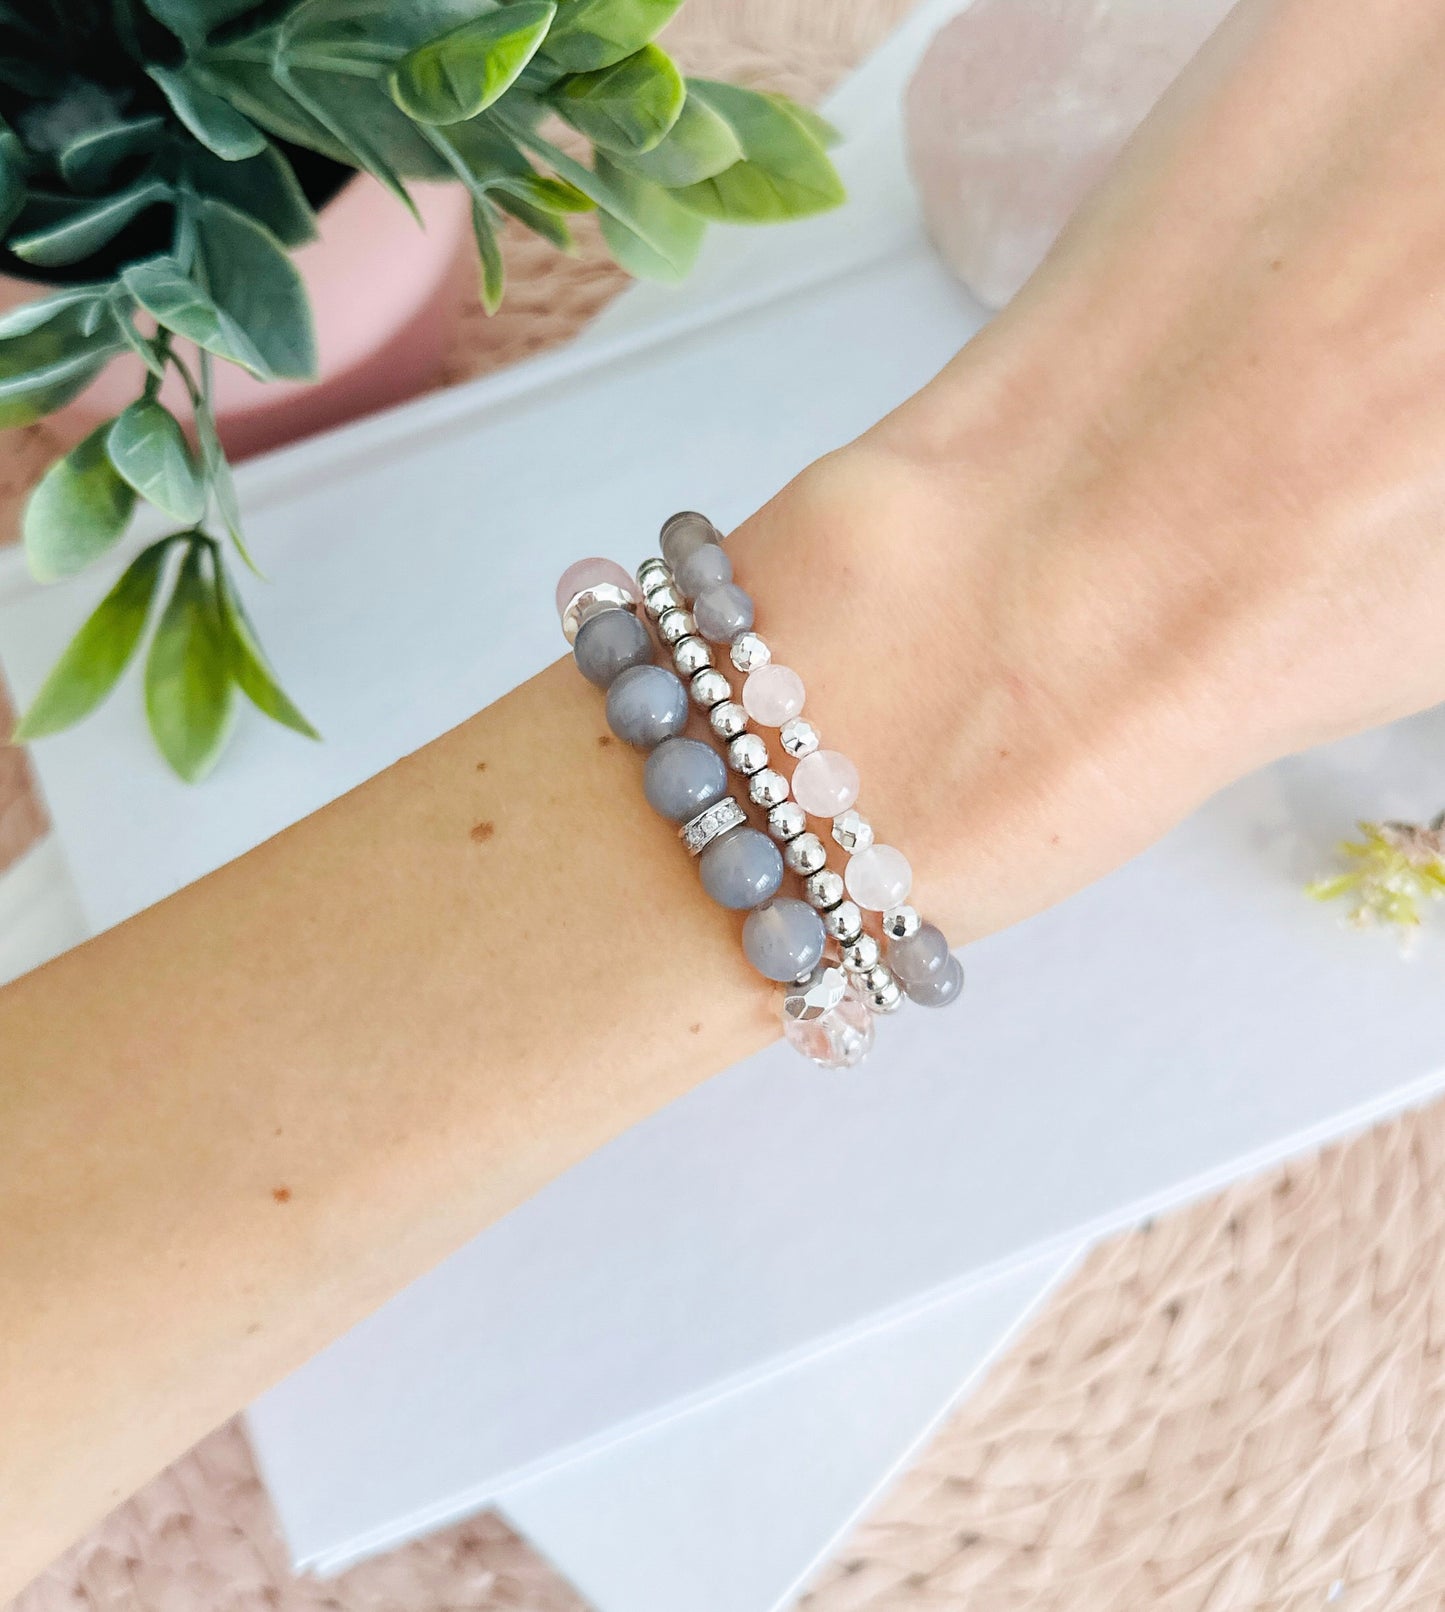 Introducing the "Velvet Rose" gemstone bracelet set, a sublime fusion of gray agate and rose quartz with captivating healing properties. The graceful gray agate, embodying stability and balance, harmonizes seamlessly with the tender energy of rose quartz, the "Stone of Unconditional Love."